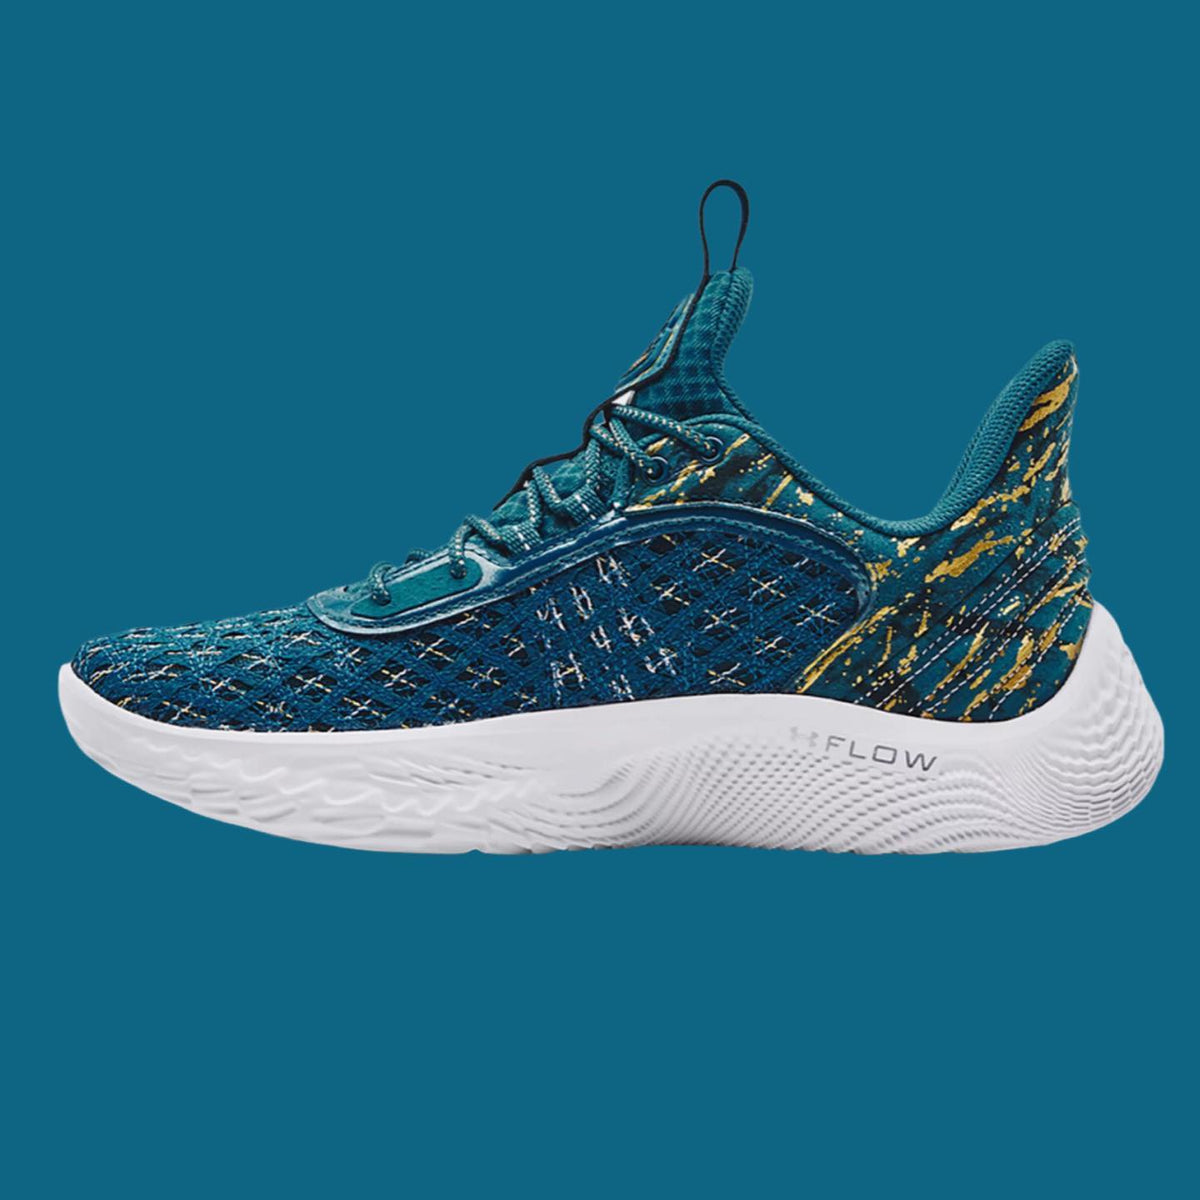 Under Armour Curry Flow 9 '2974' - 3026437-400